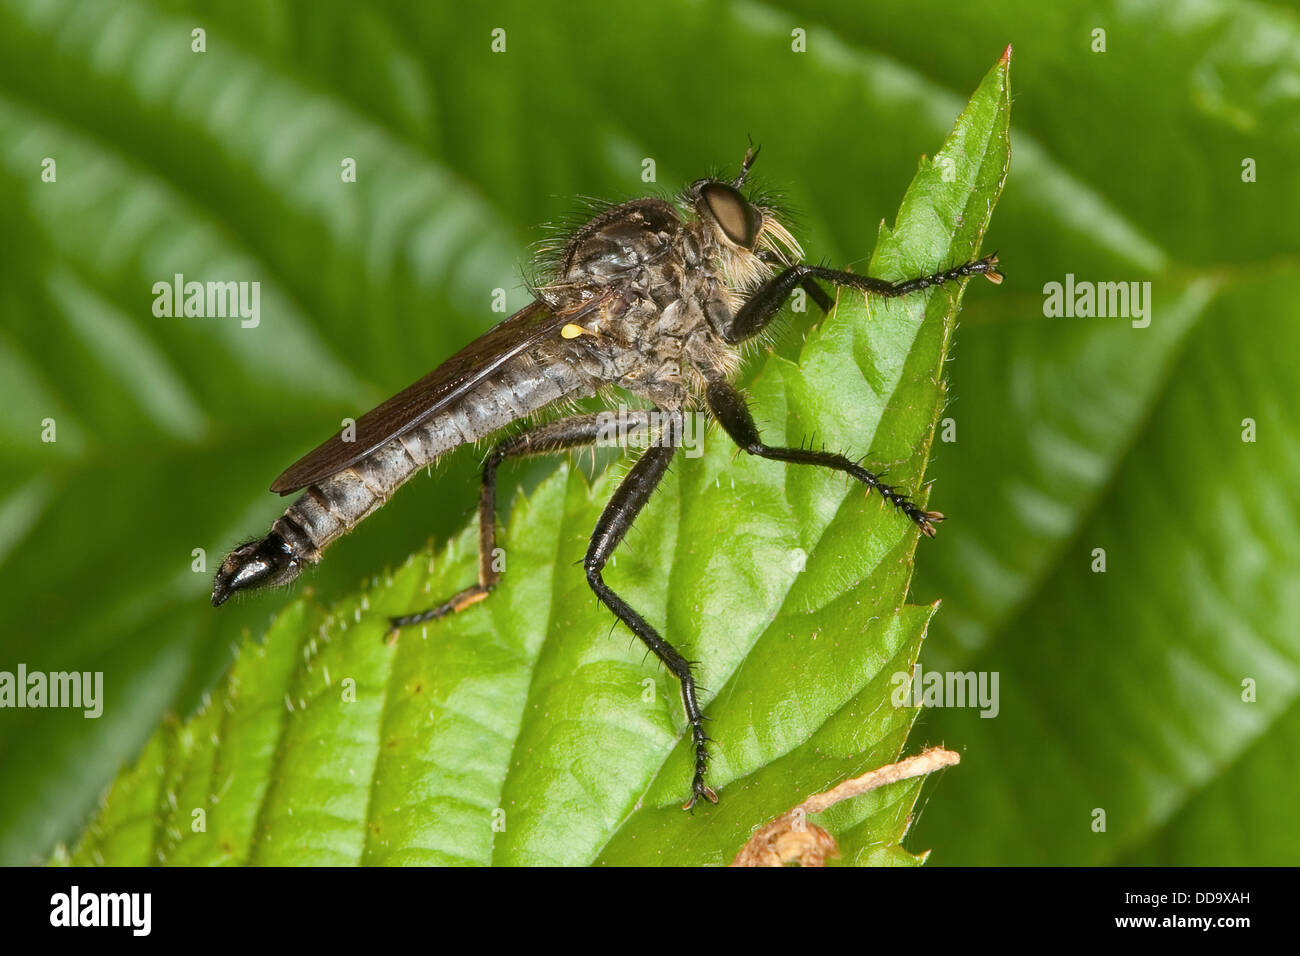 Robberfly, robber-fly, Robberflies, Berg-Raubfliege, Bergraubfliege, Raubfliege, Raubfliegen, Strauchdieb, Didysmachus picipes Stock Photo